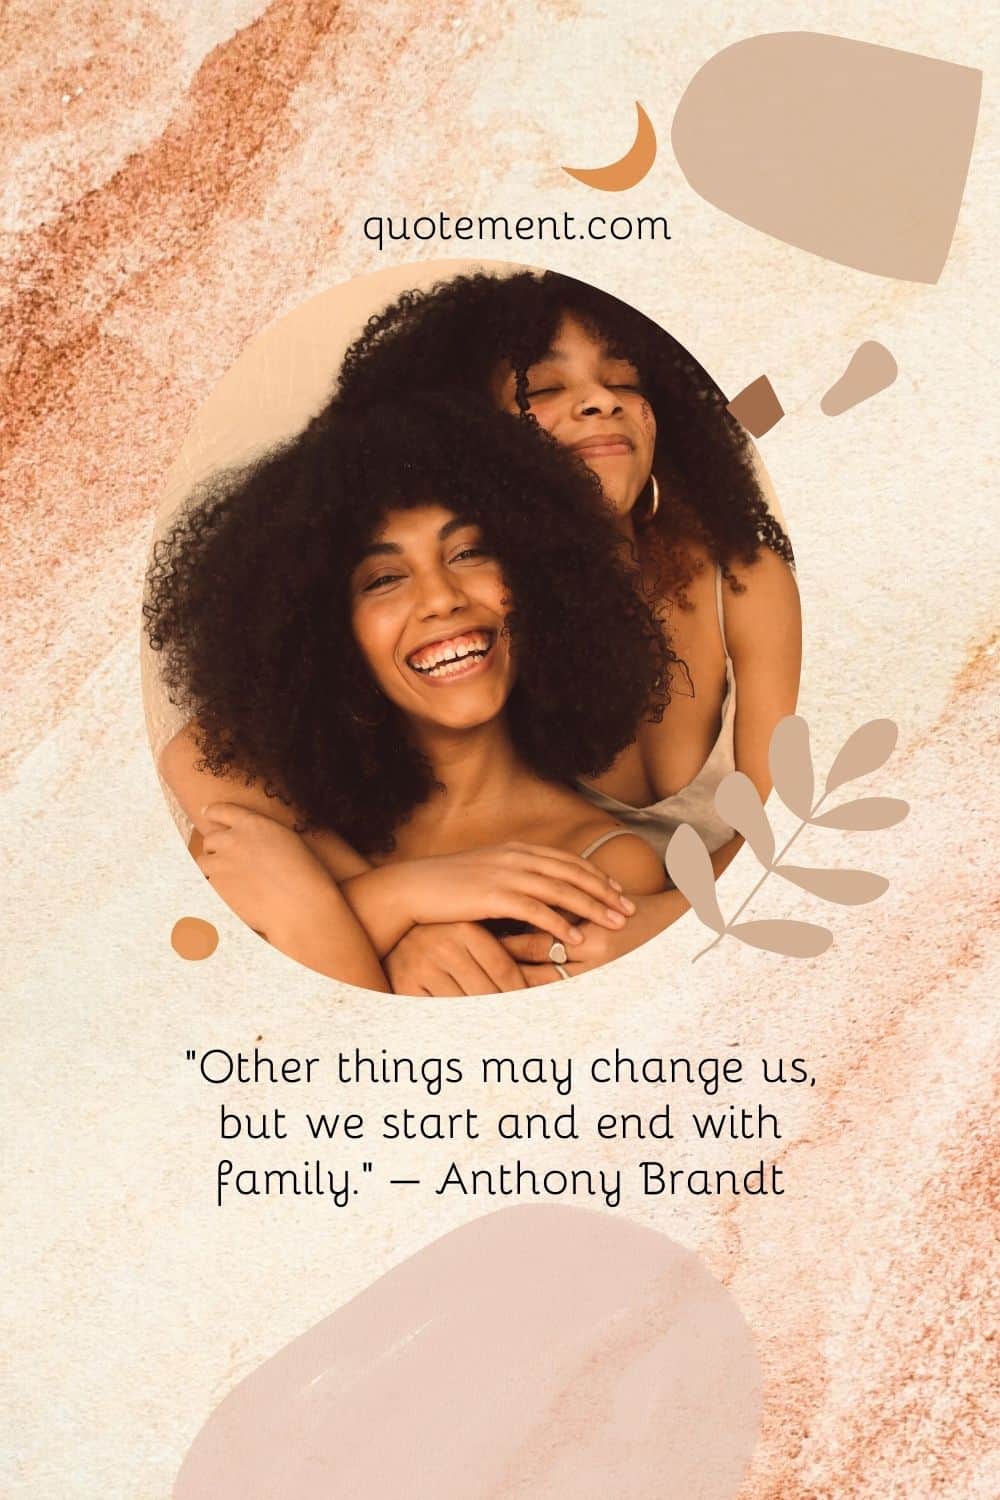 “Other things may change us, but we start and end with family.” – Anthony Brandt